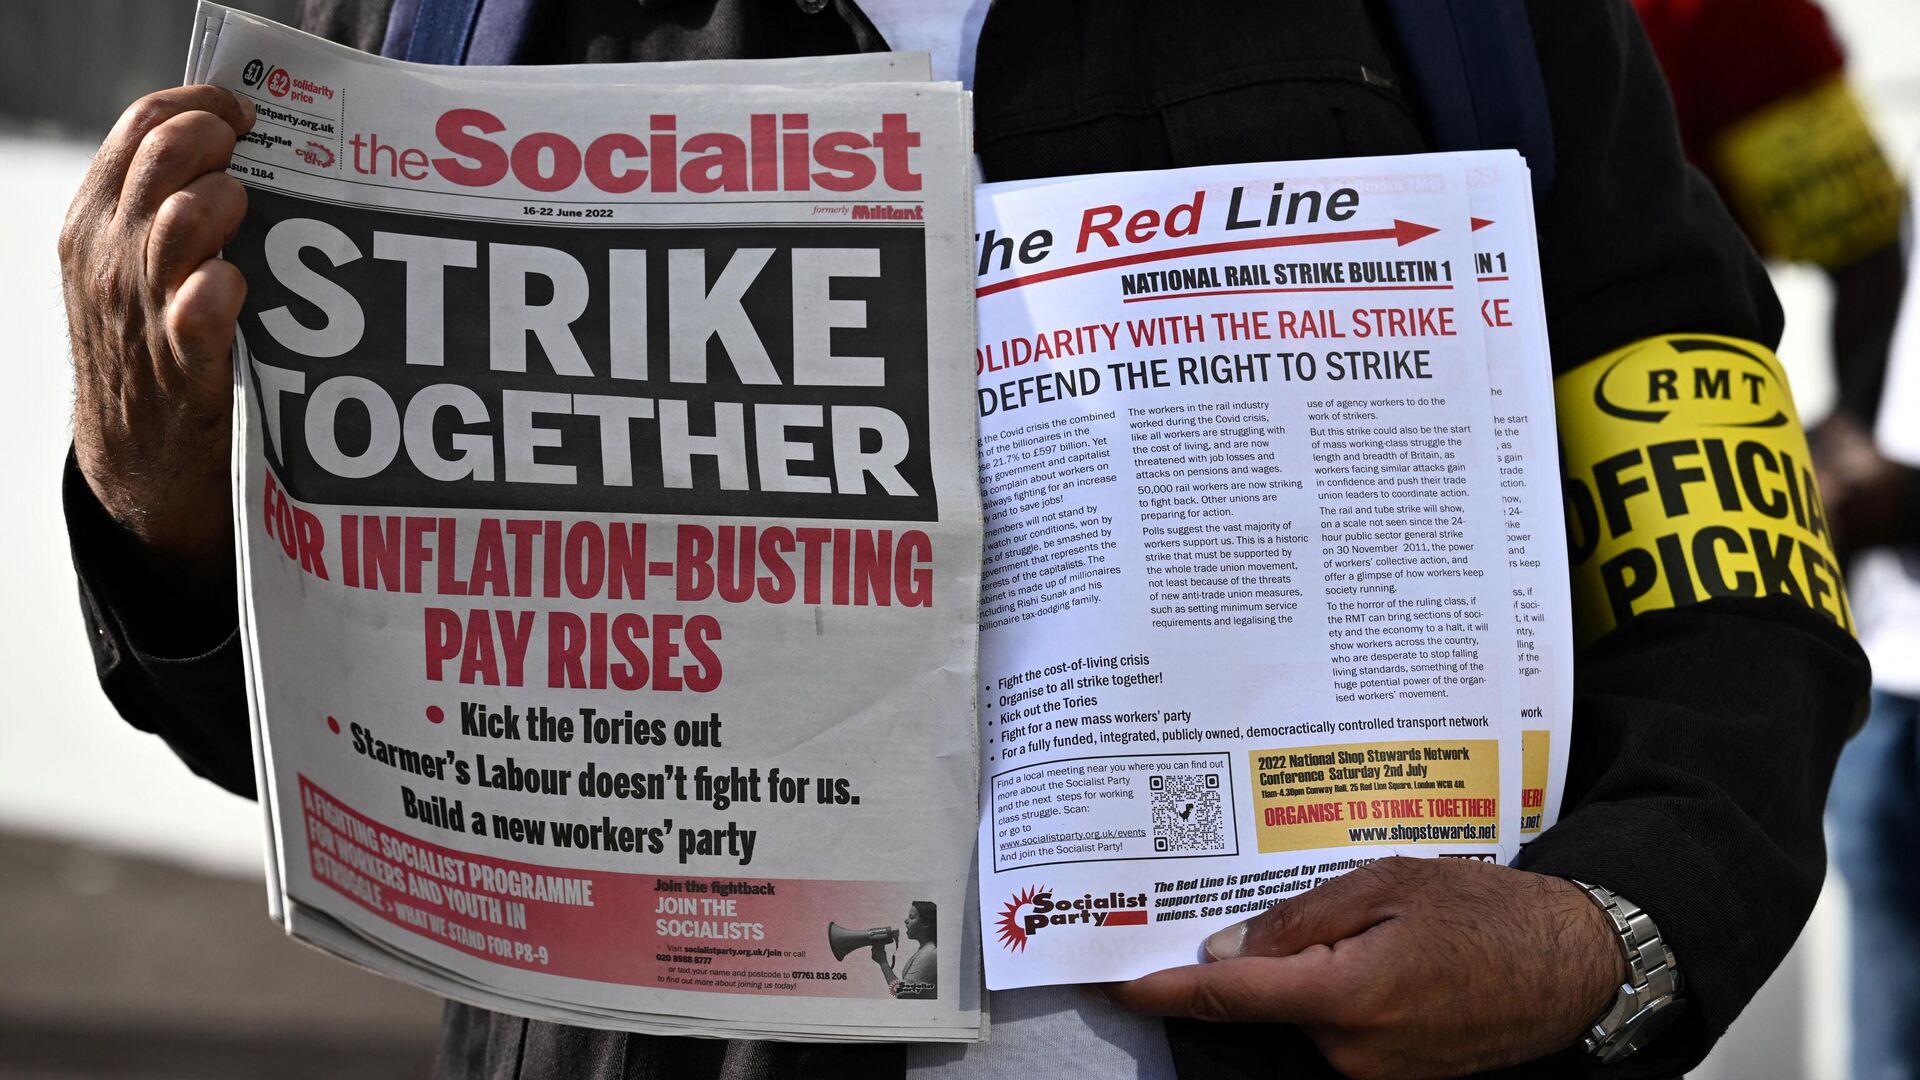 Pamphlets and newspapers are distributed at a picket line outside Waterloo Station in London on June 21, 2022 as the biggest rail strike in over 30 years hits the UK - Sputnik International, 1920, 21.06.2022